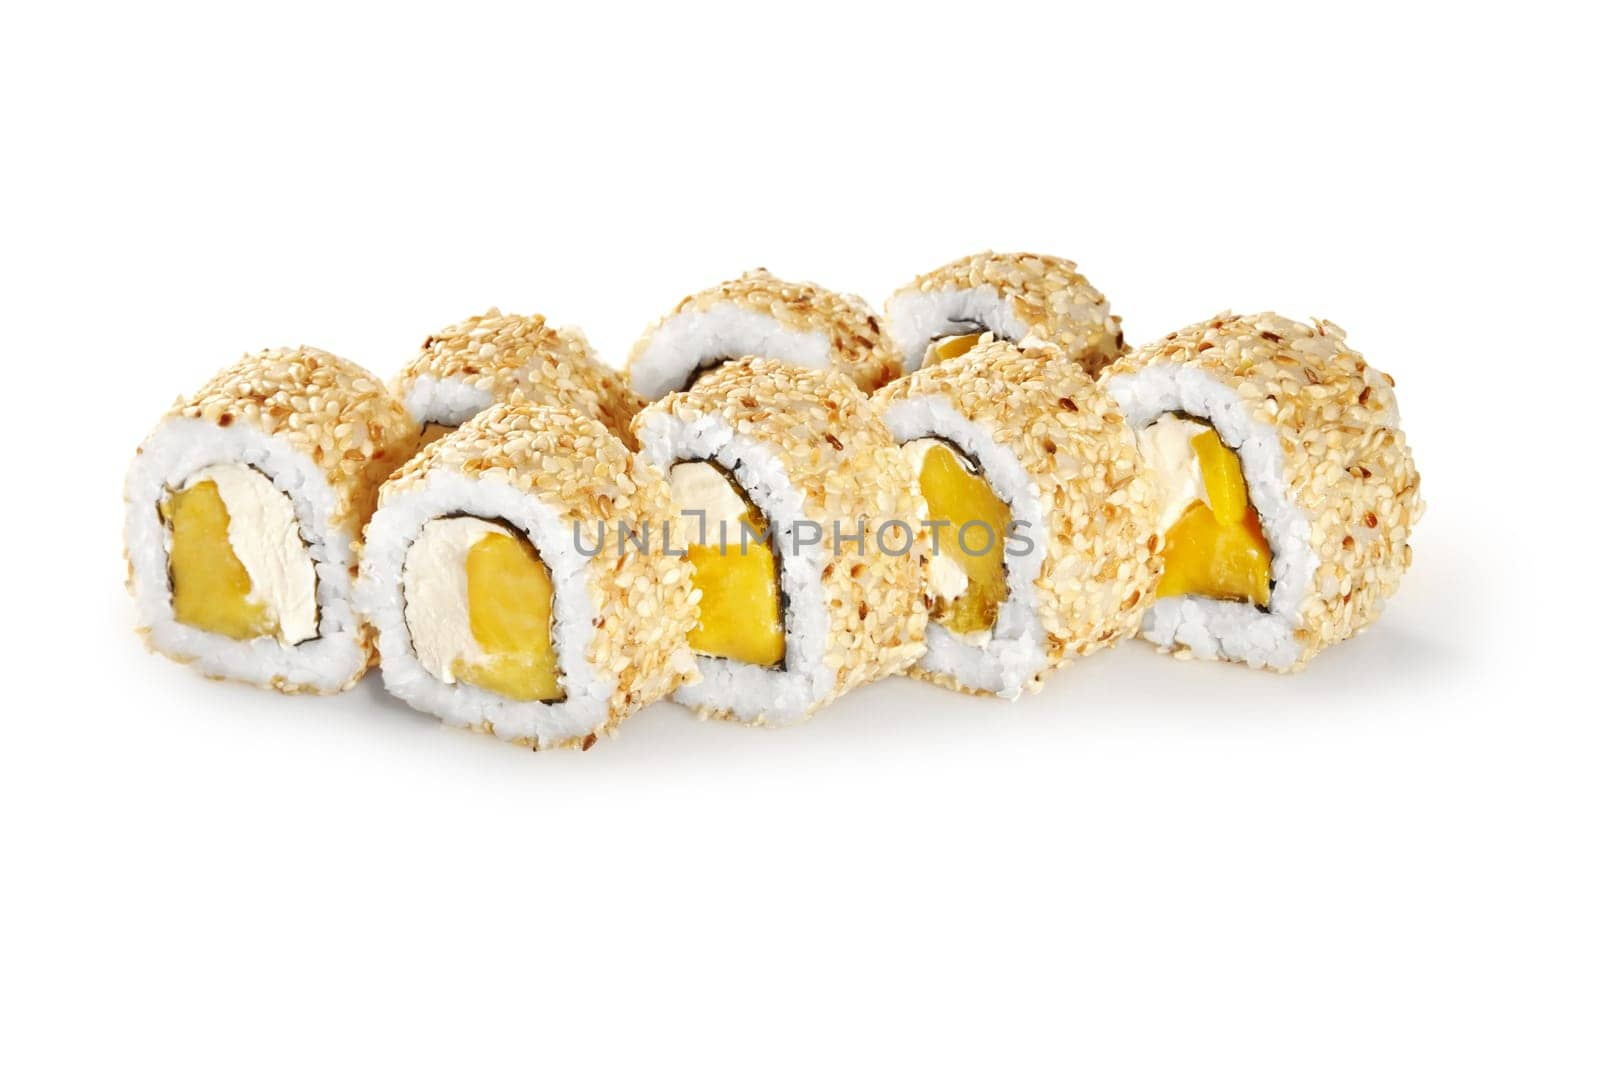 Sushi roll with cream cheese, mango and sesame seeds by nazarovsergey